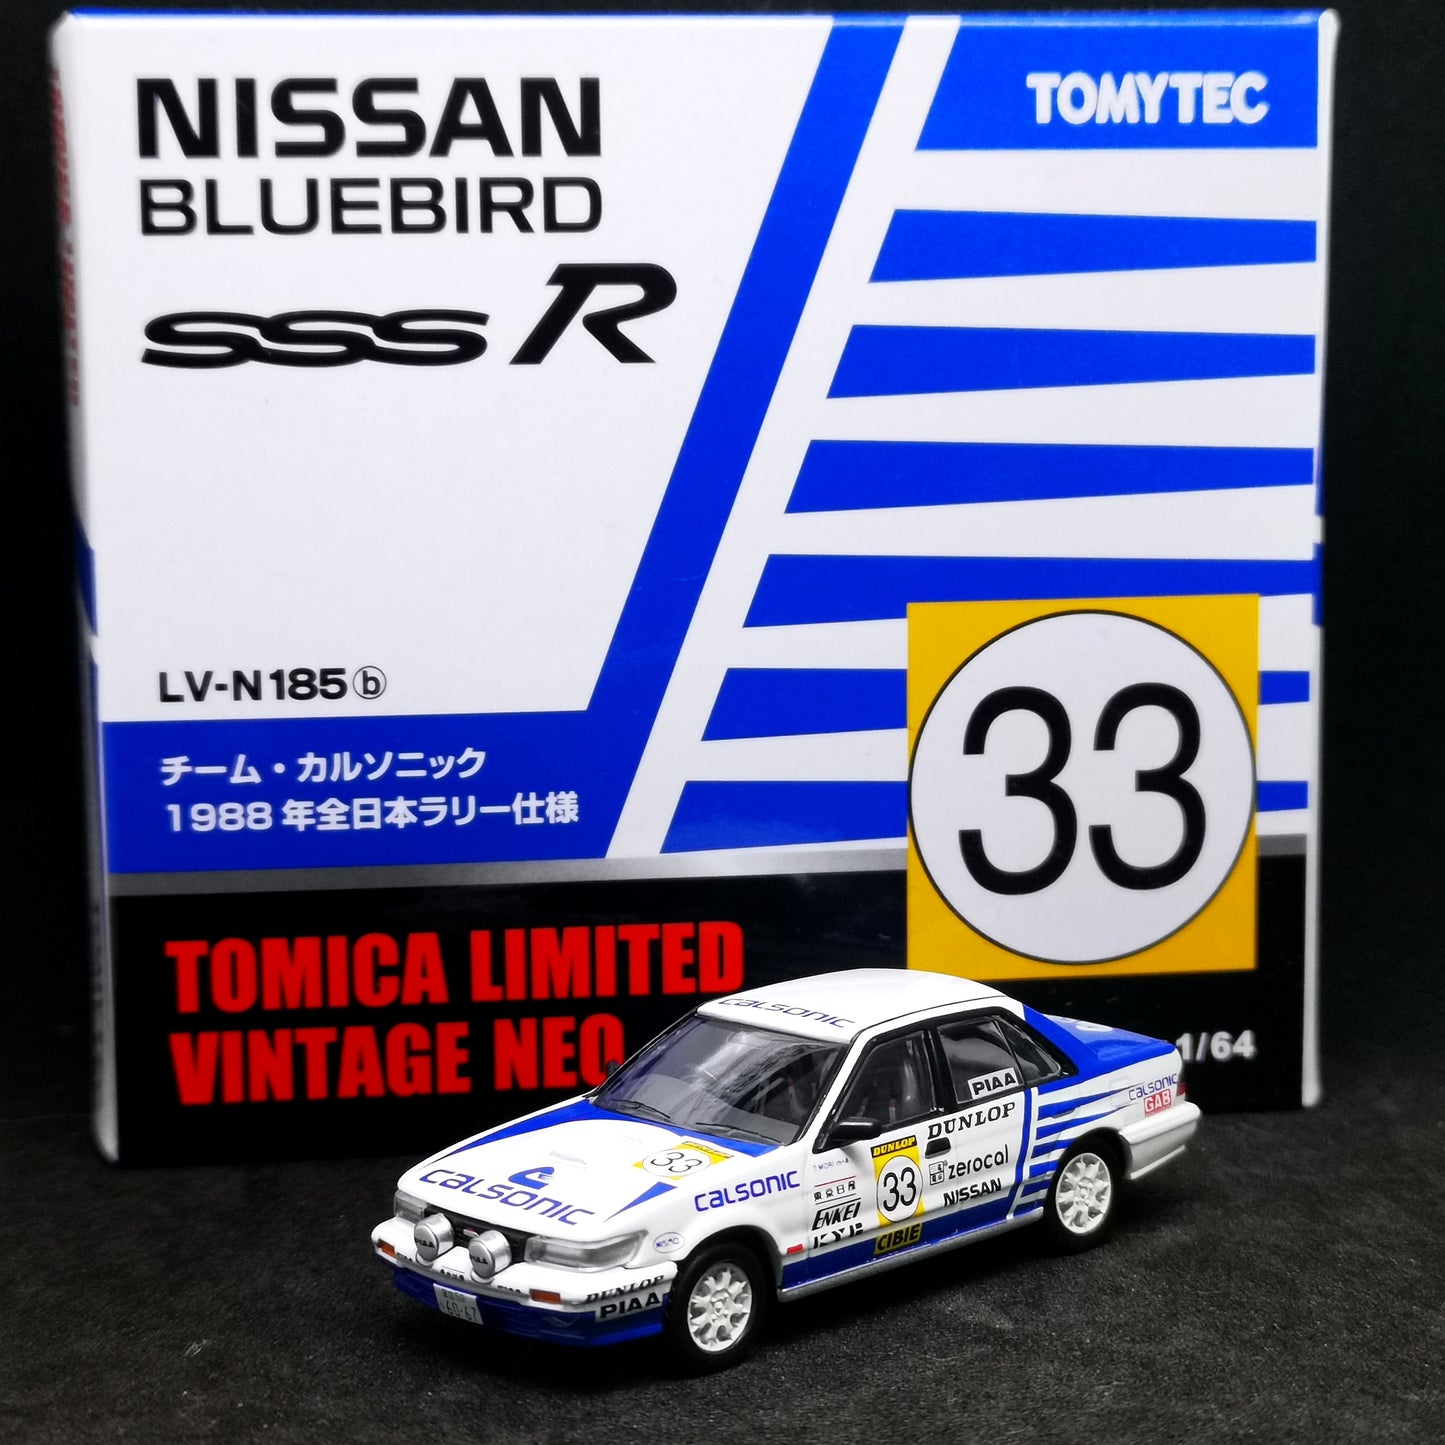 Tomica Limited Vintage Neo Nissan Blue Bird SSS R Team Calsonic 1988 Japan Rally Spec